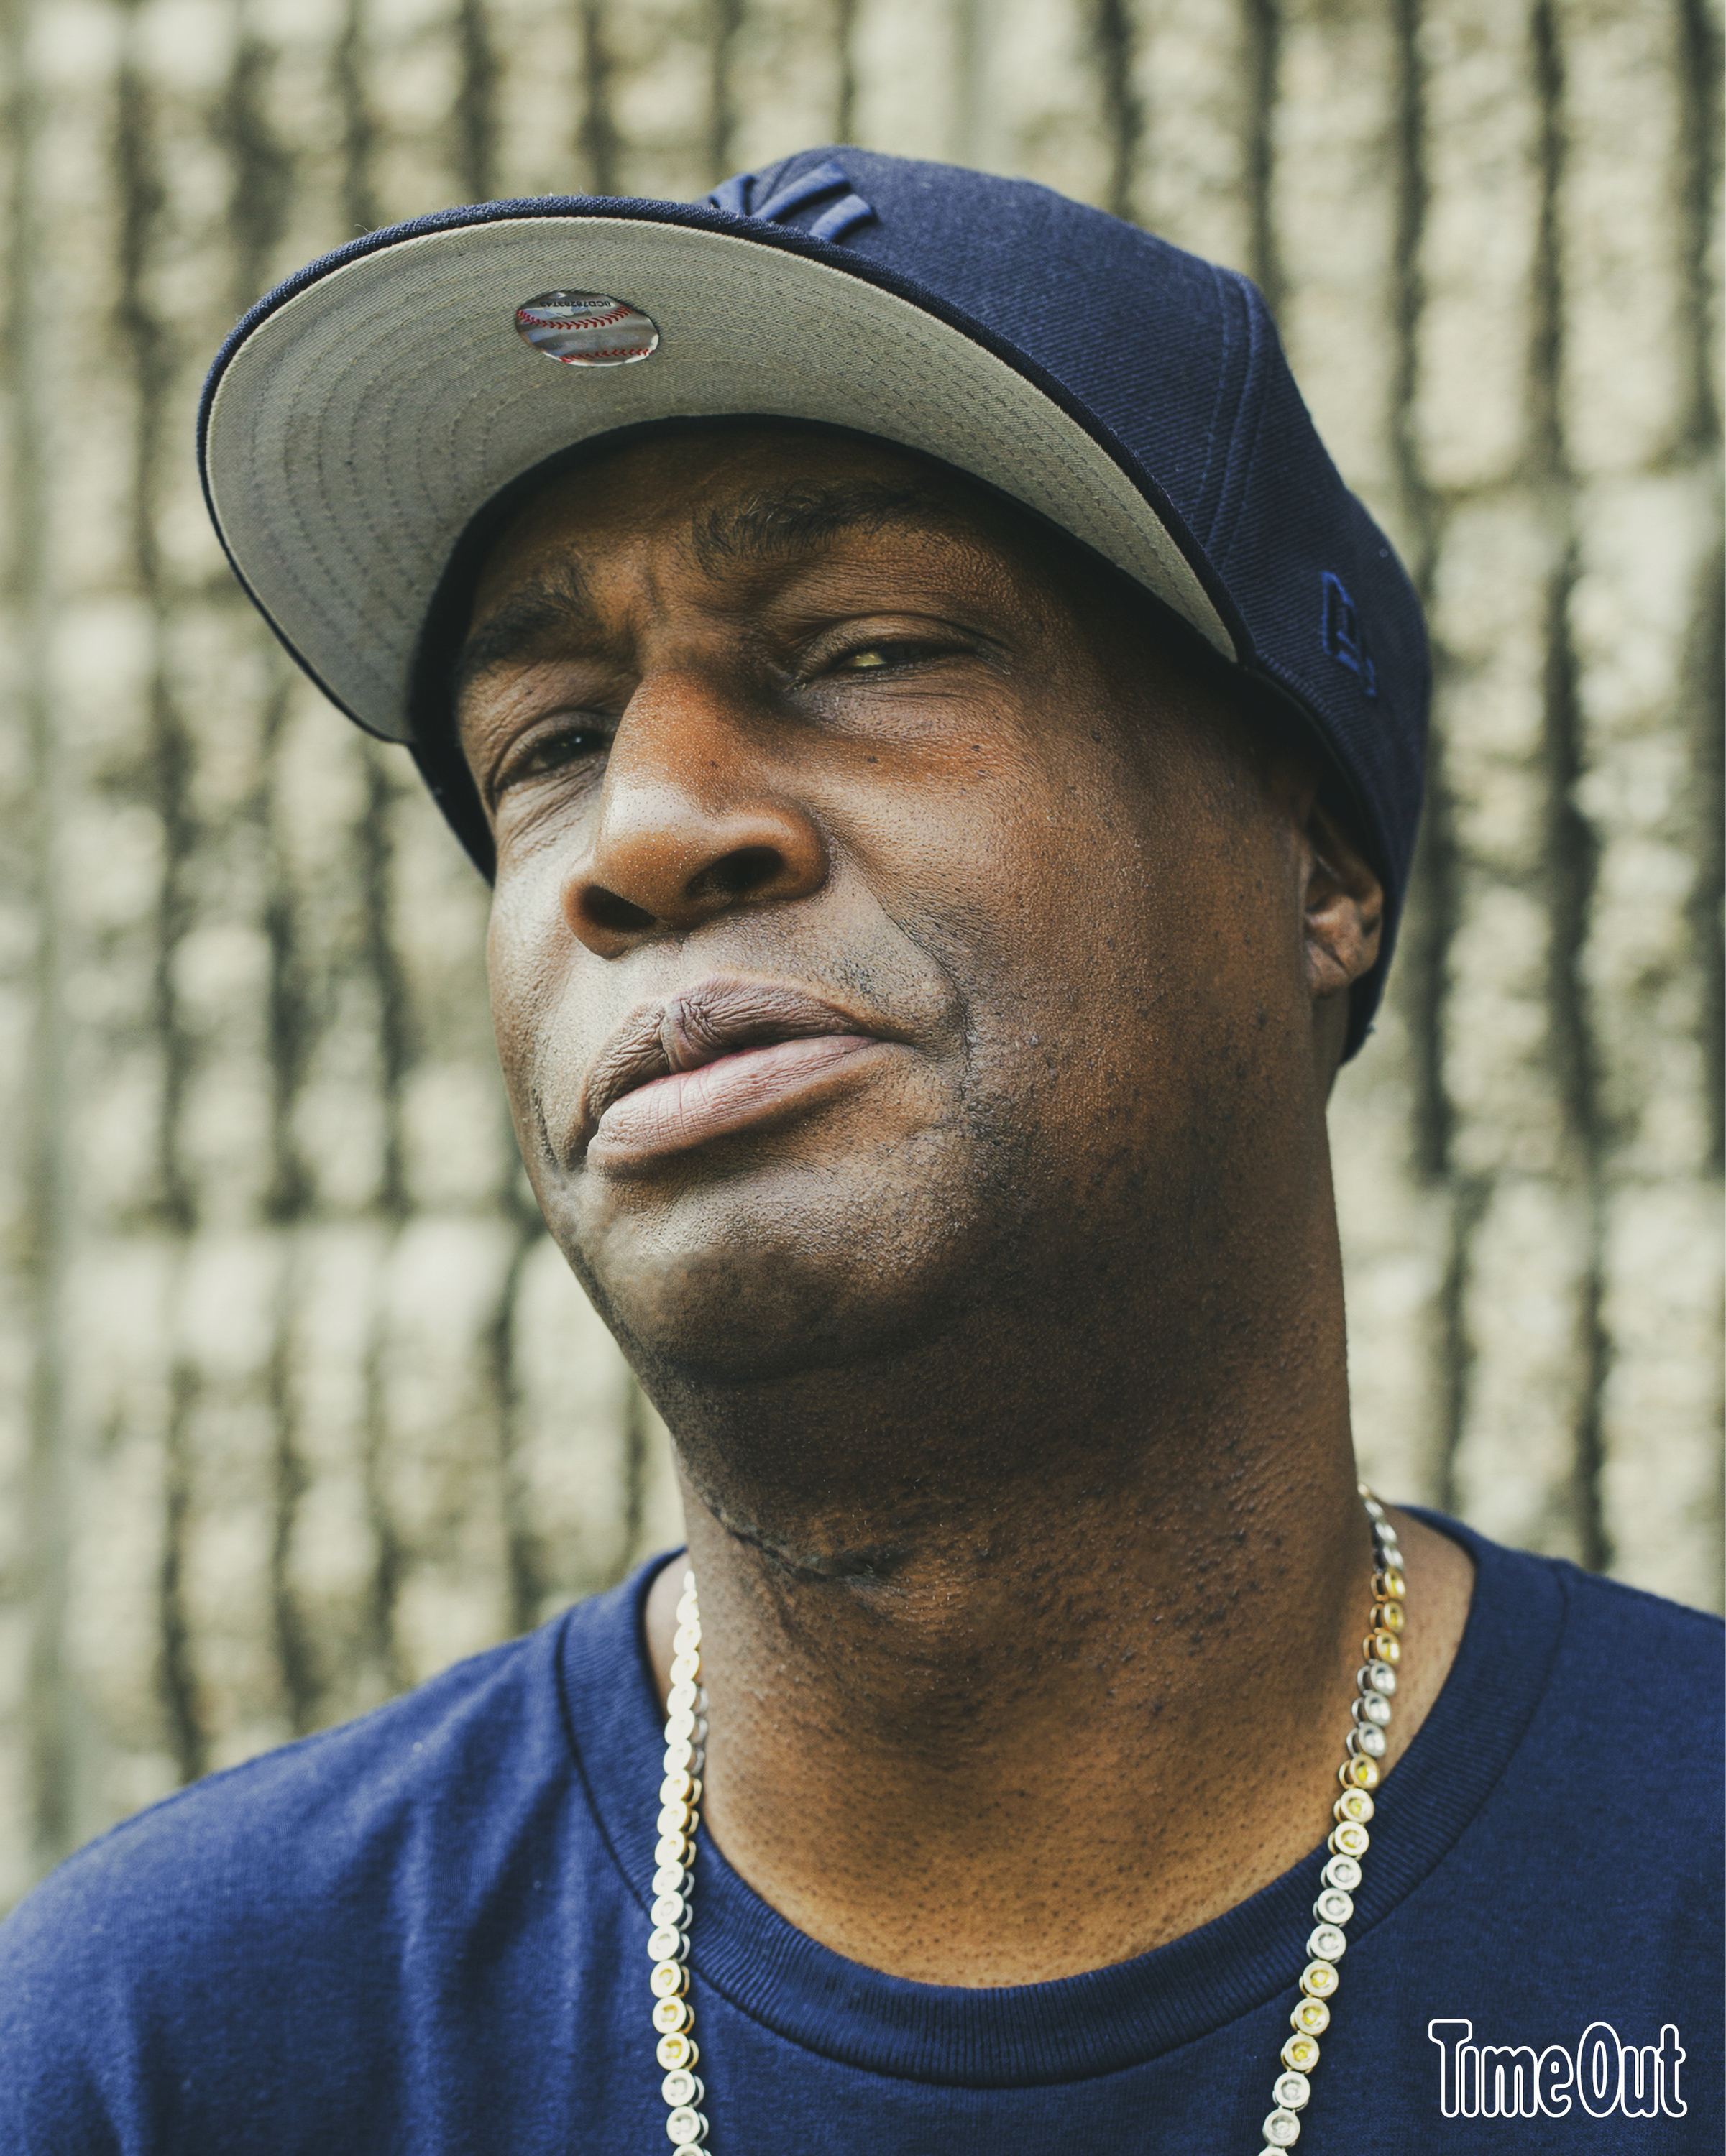 Grandmaster Flash on the History of Hip-Hop, the Quick Mix, and More